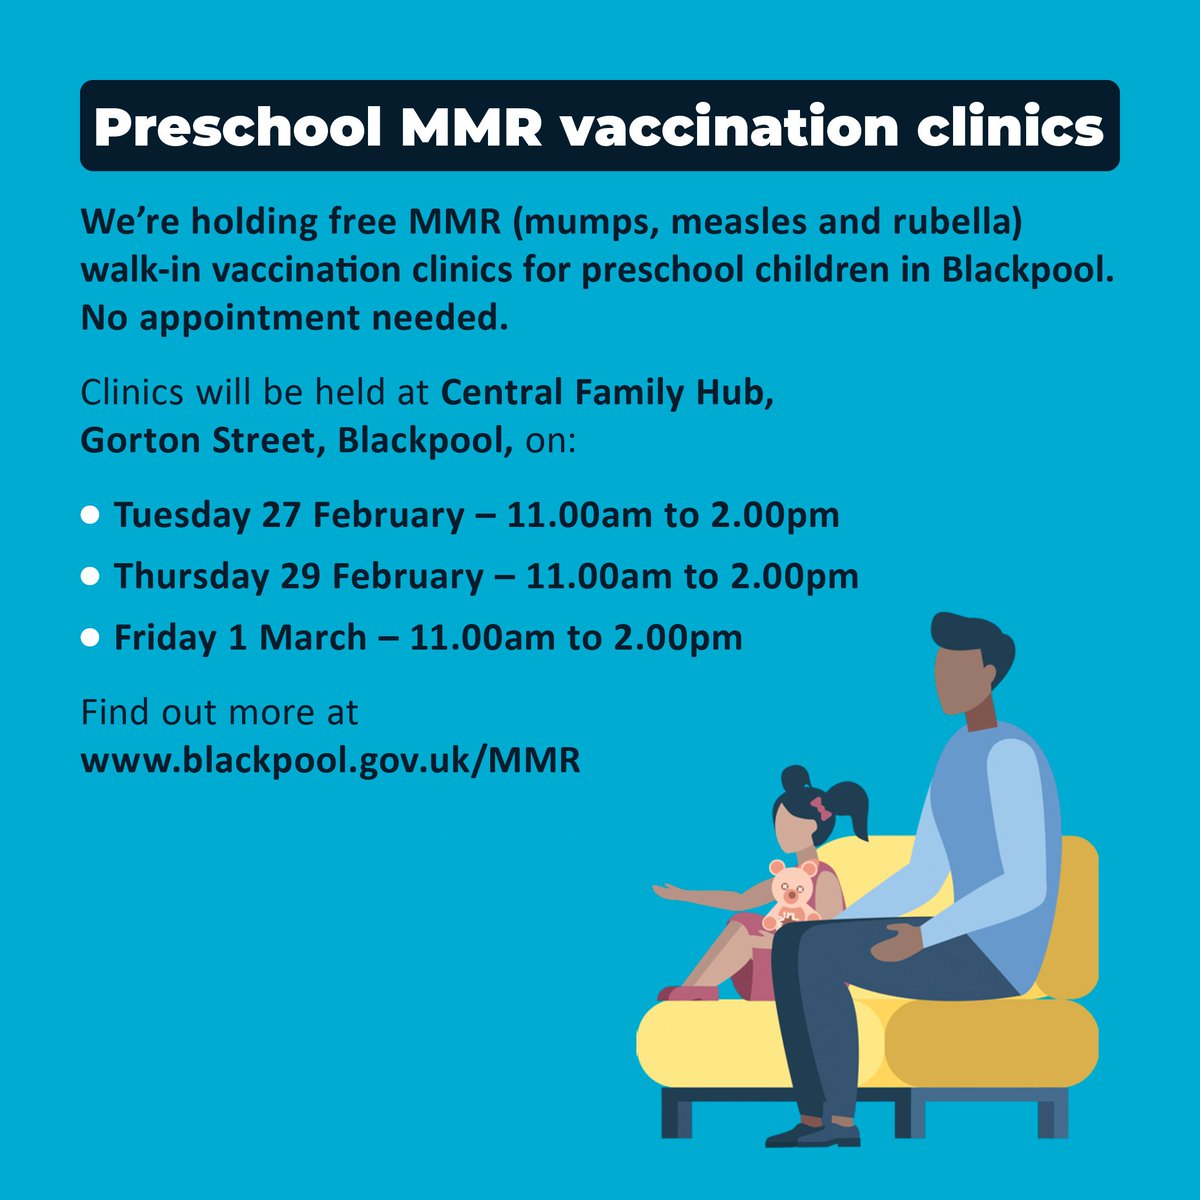 • MMR VACCINATION CLINICS FOR UNDER 5's • Today was our first MMR (mumps, measles and rubella) walk-in vaccination clinic for preschool children in Blackpool. Don't worry if you missed it - there's still 2 more clinics this week! See info ⤏ blackpool.gov.uk/MMR 1/6